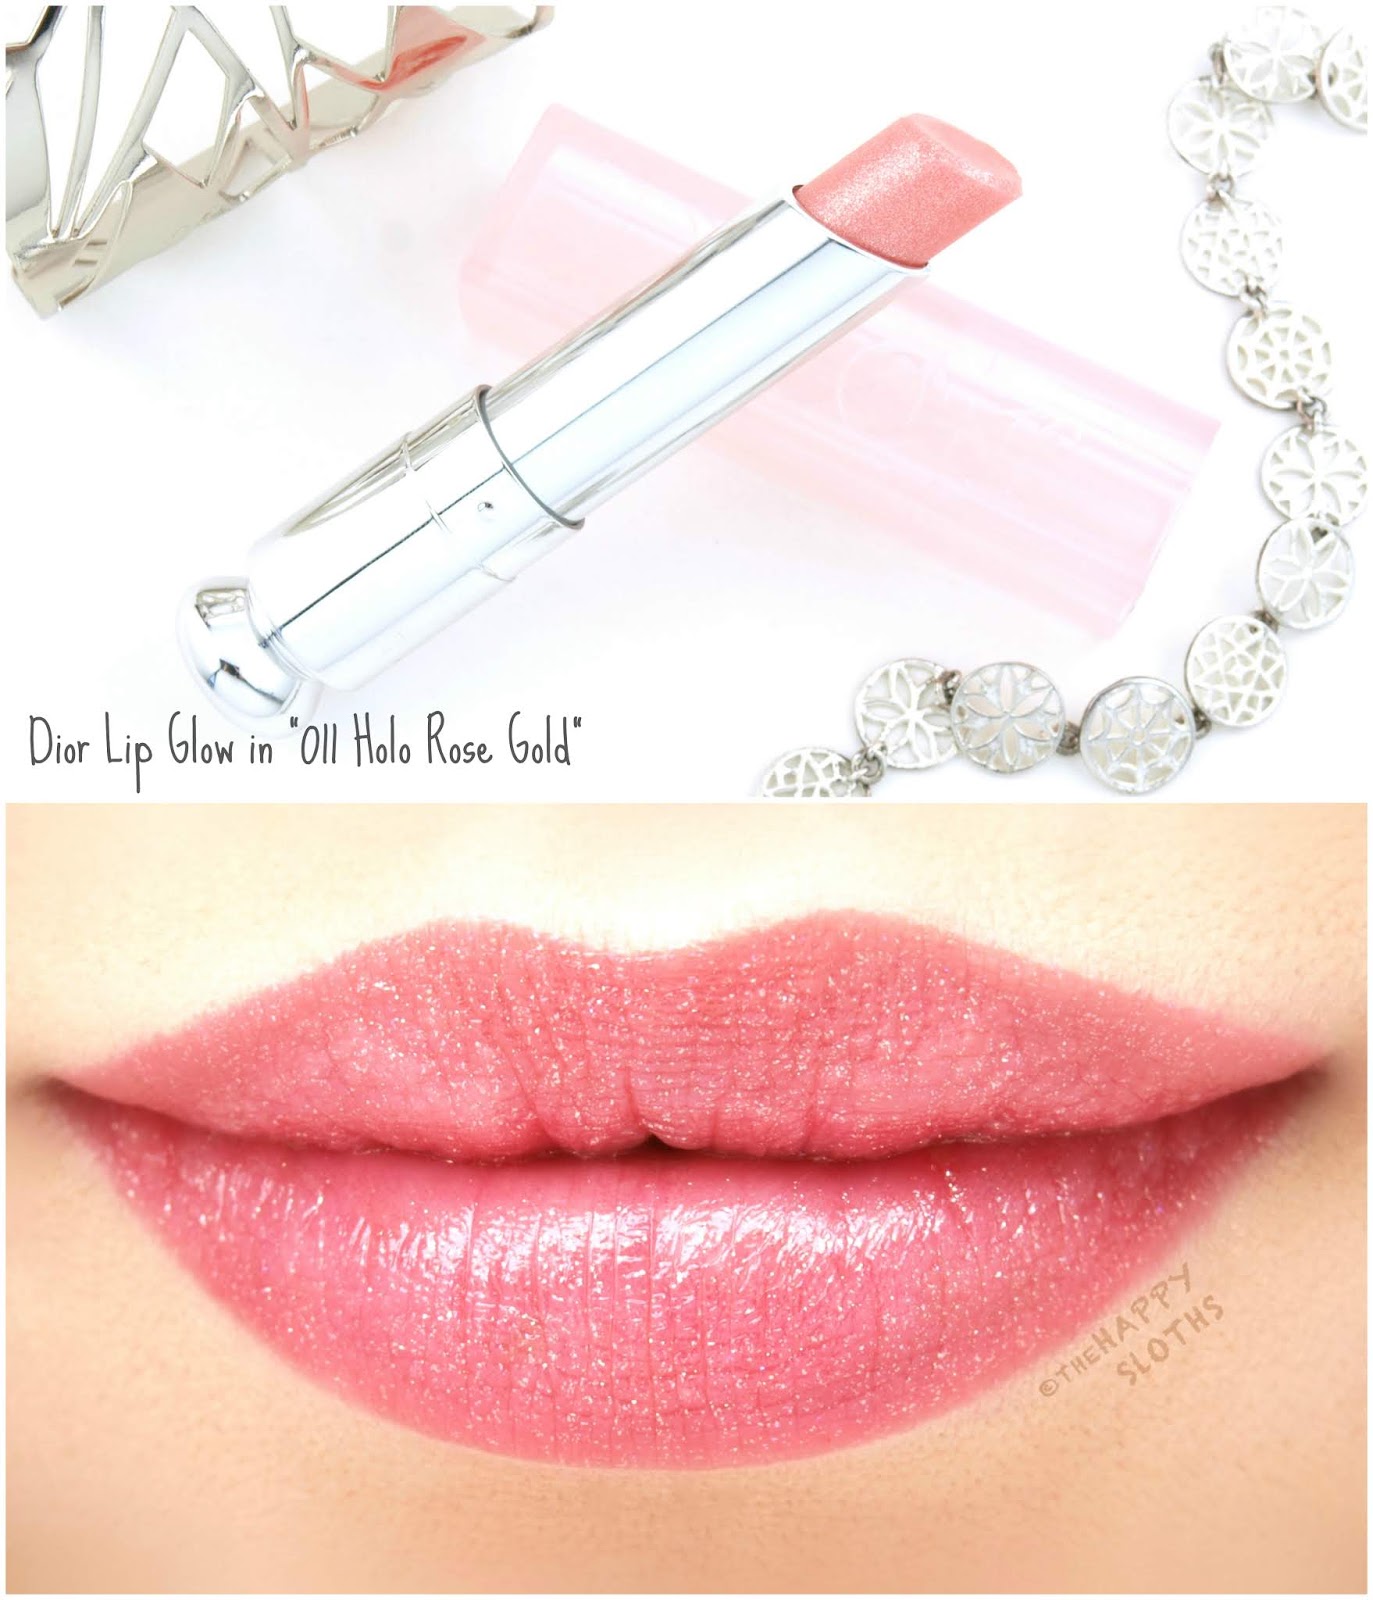 Dior | Lip Glow in "011 Holo Rose Gold": Review and Swatches